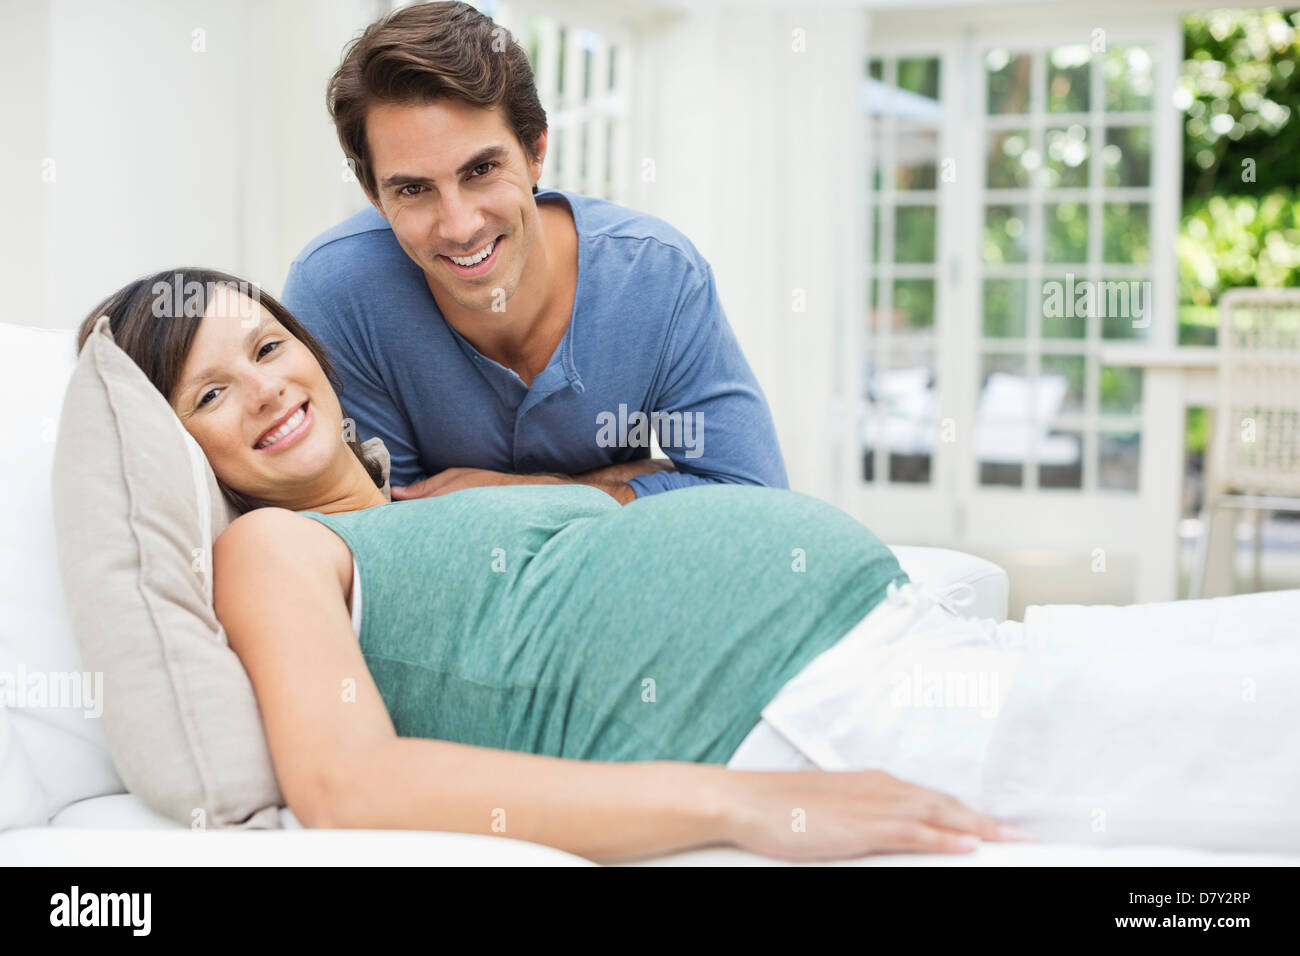 Man sitting next to pregnant woman resting on bed Stock Photo